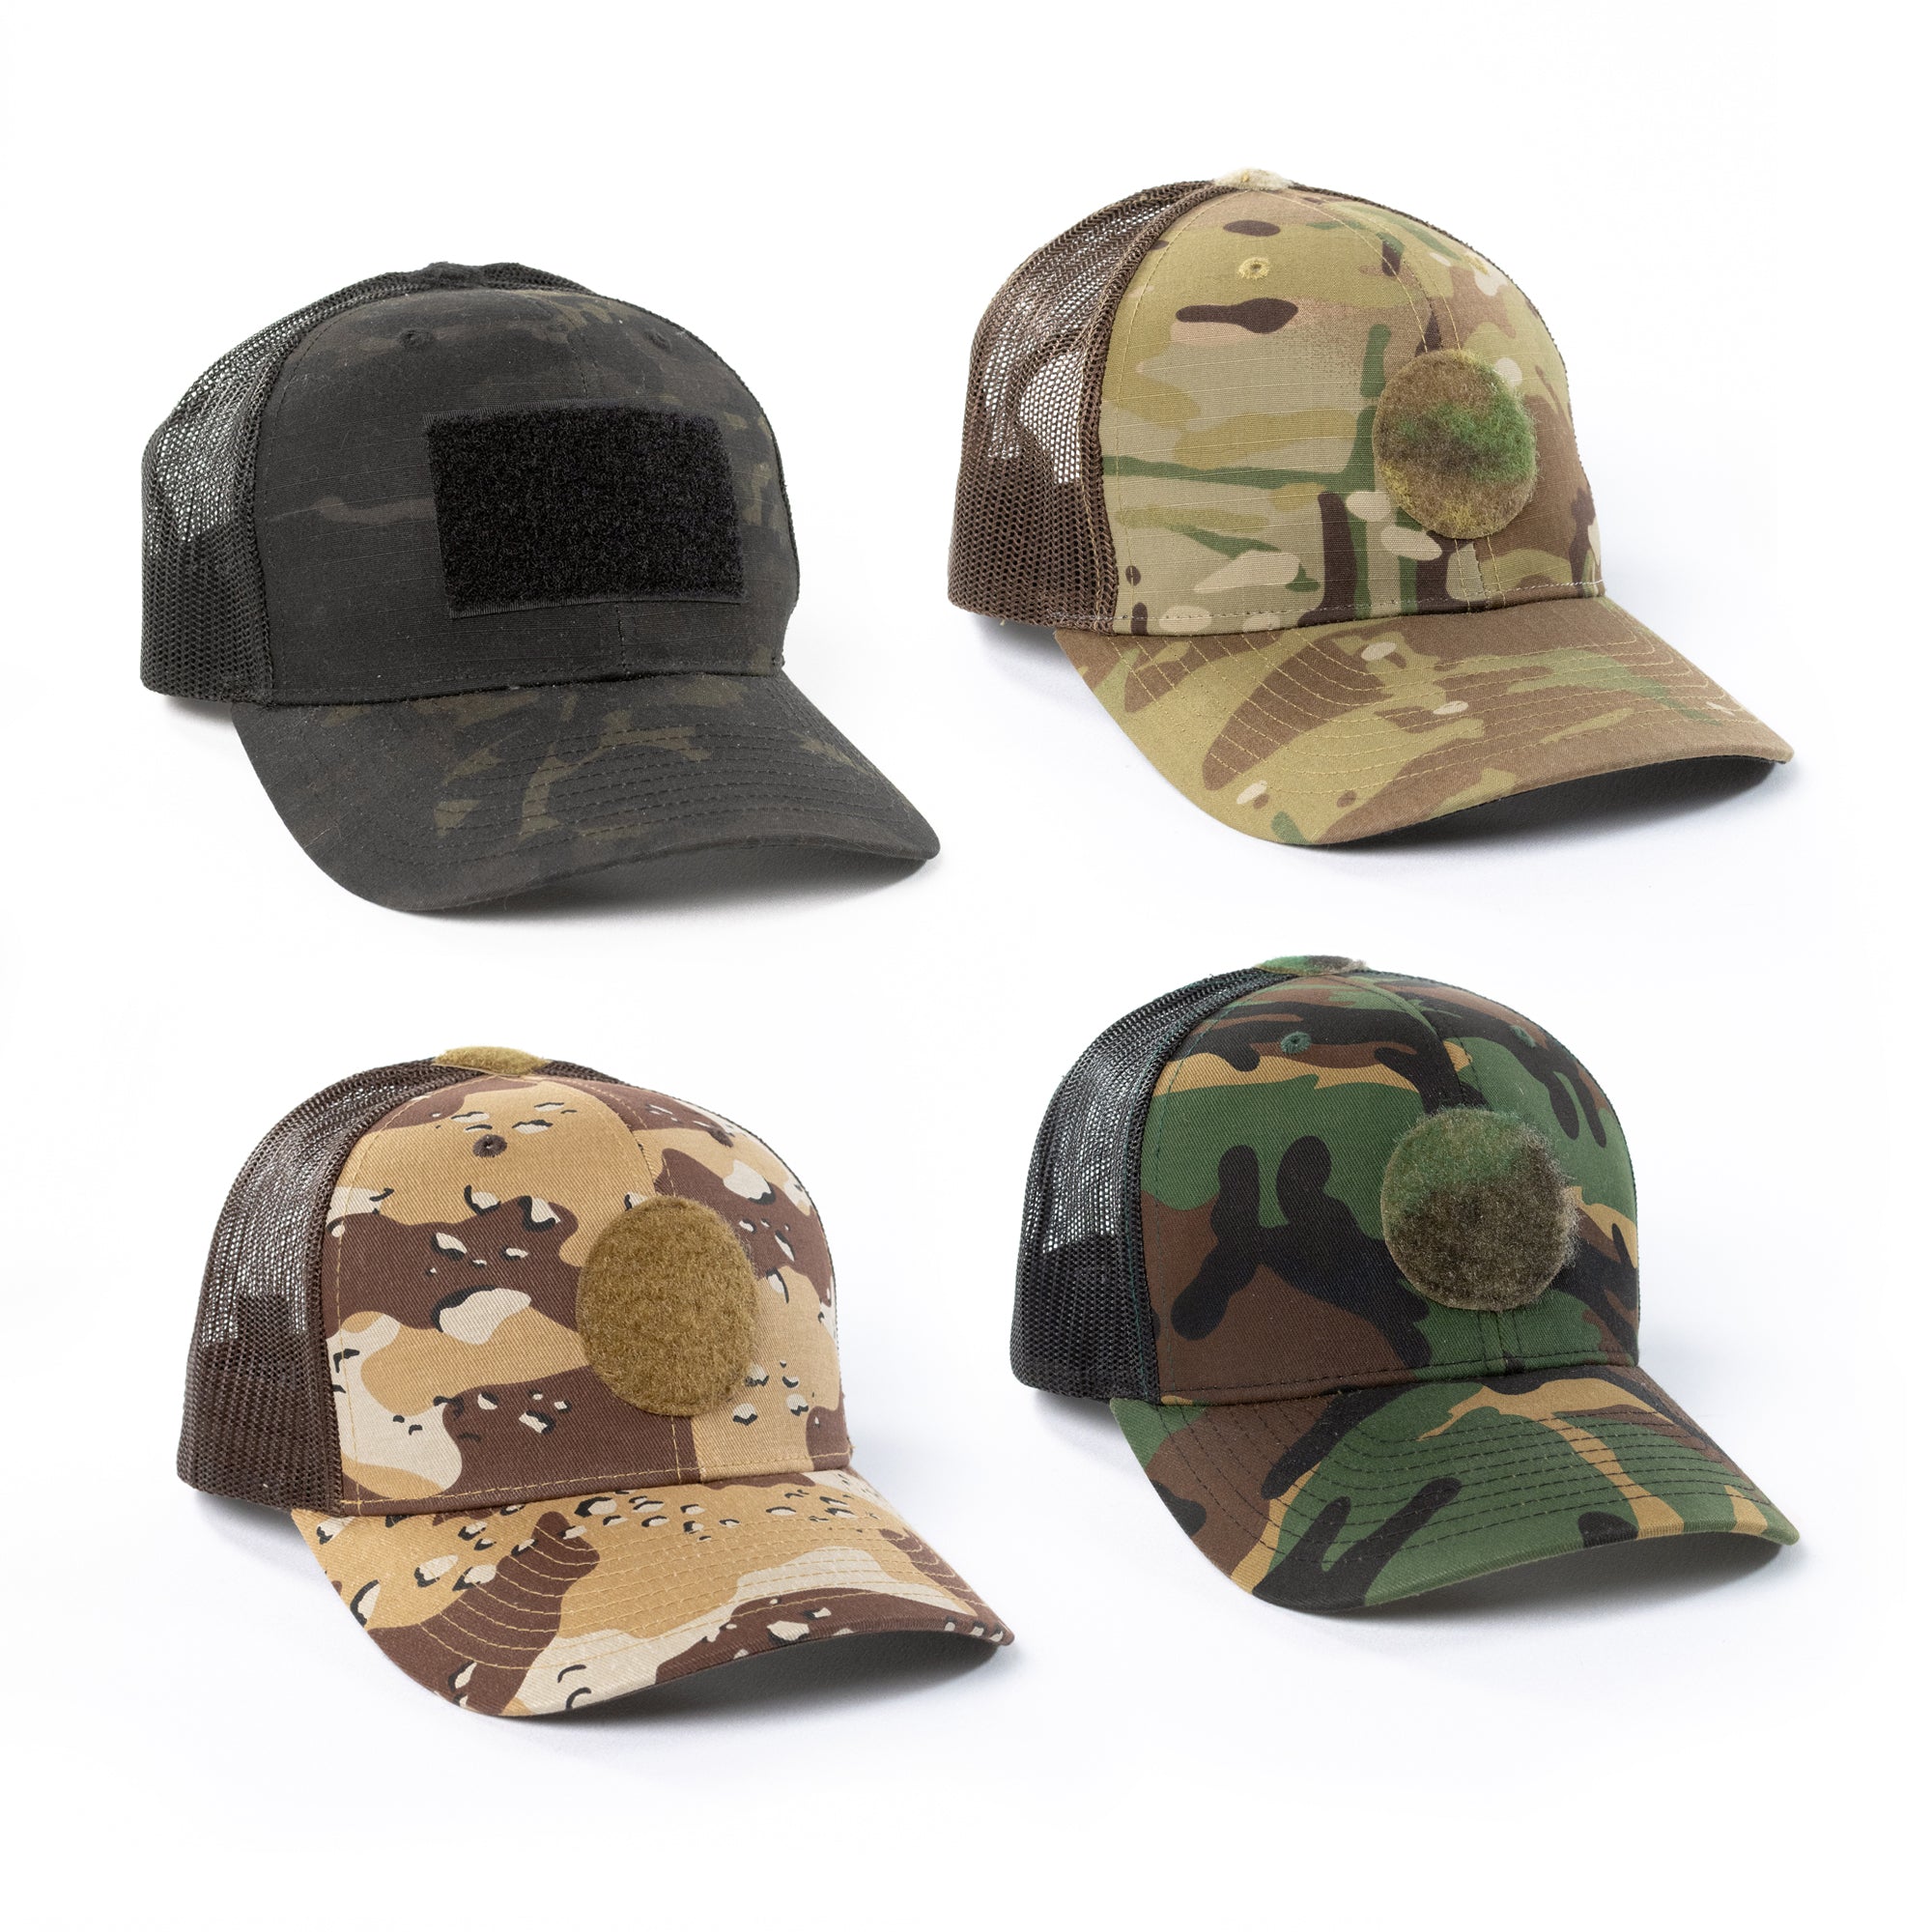 Camouflage Hats / Snap back - Custom patch panel - low profile